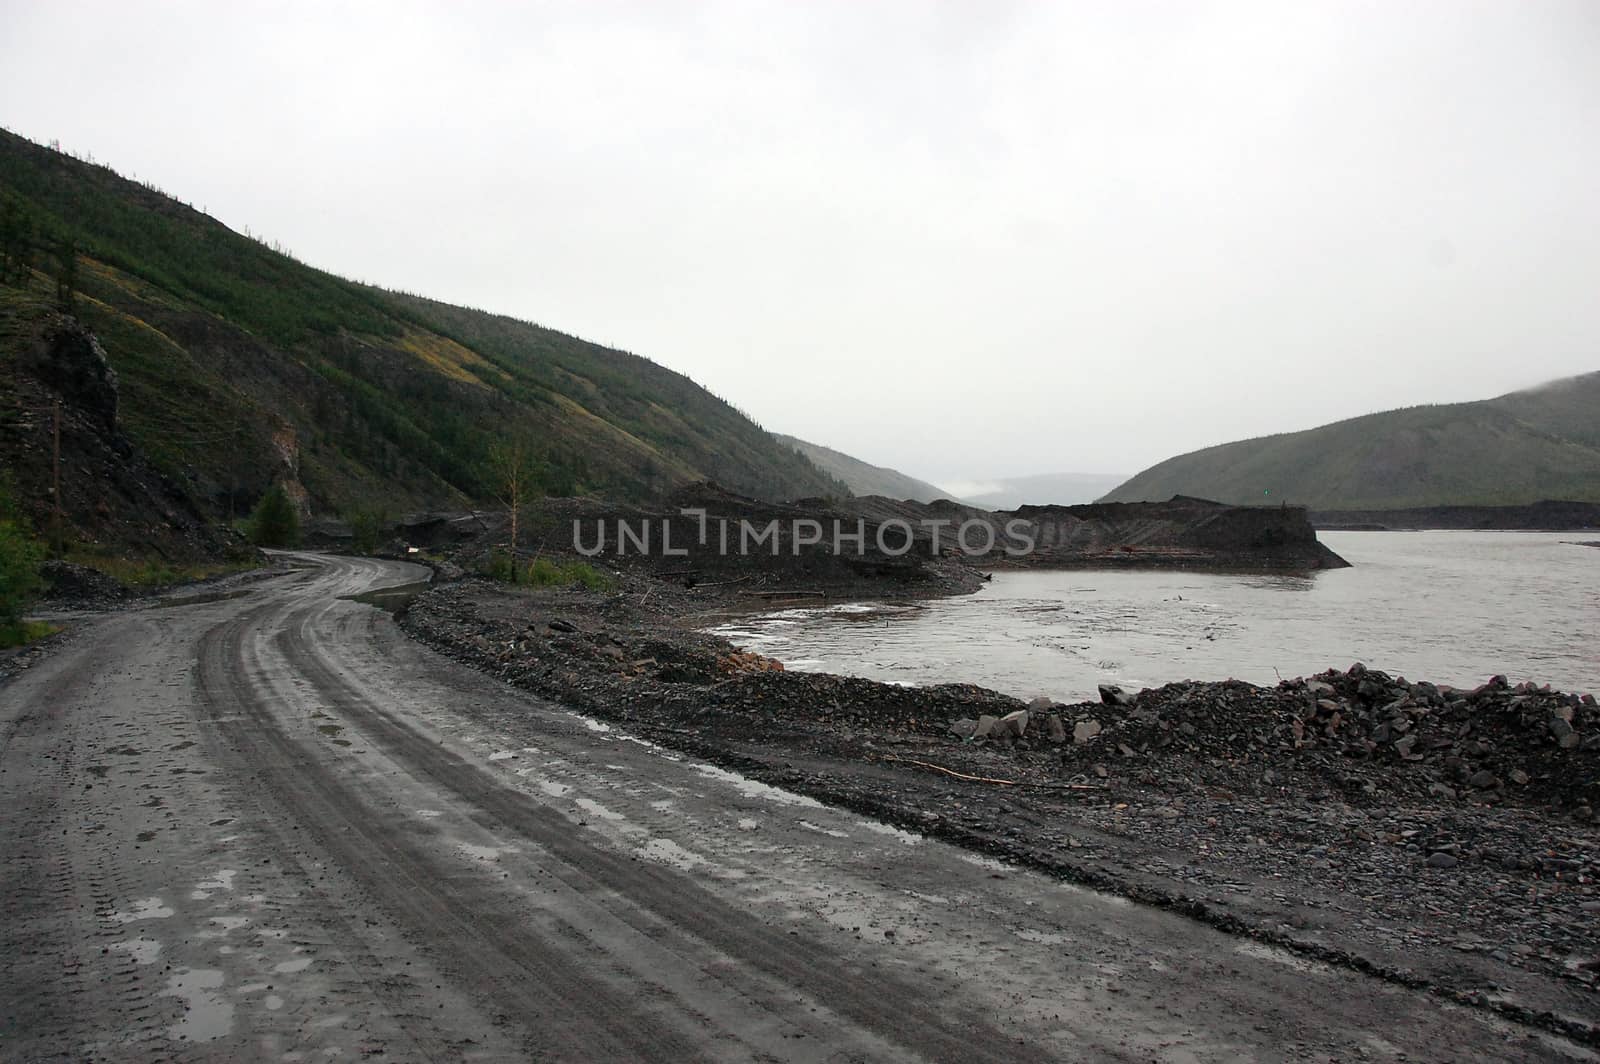 Gravel road Kolyma state highway at outback of Russia by danemo